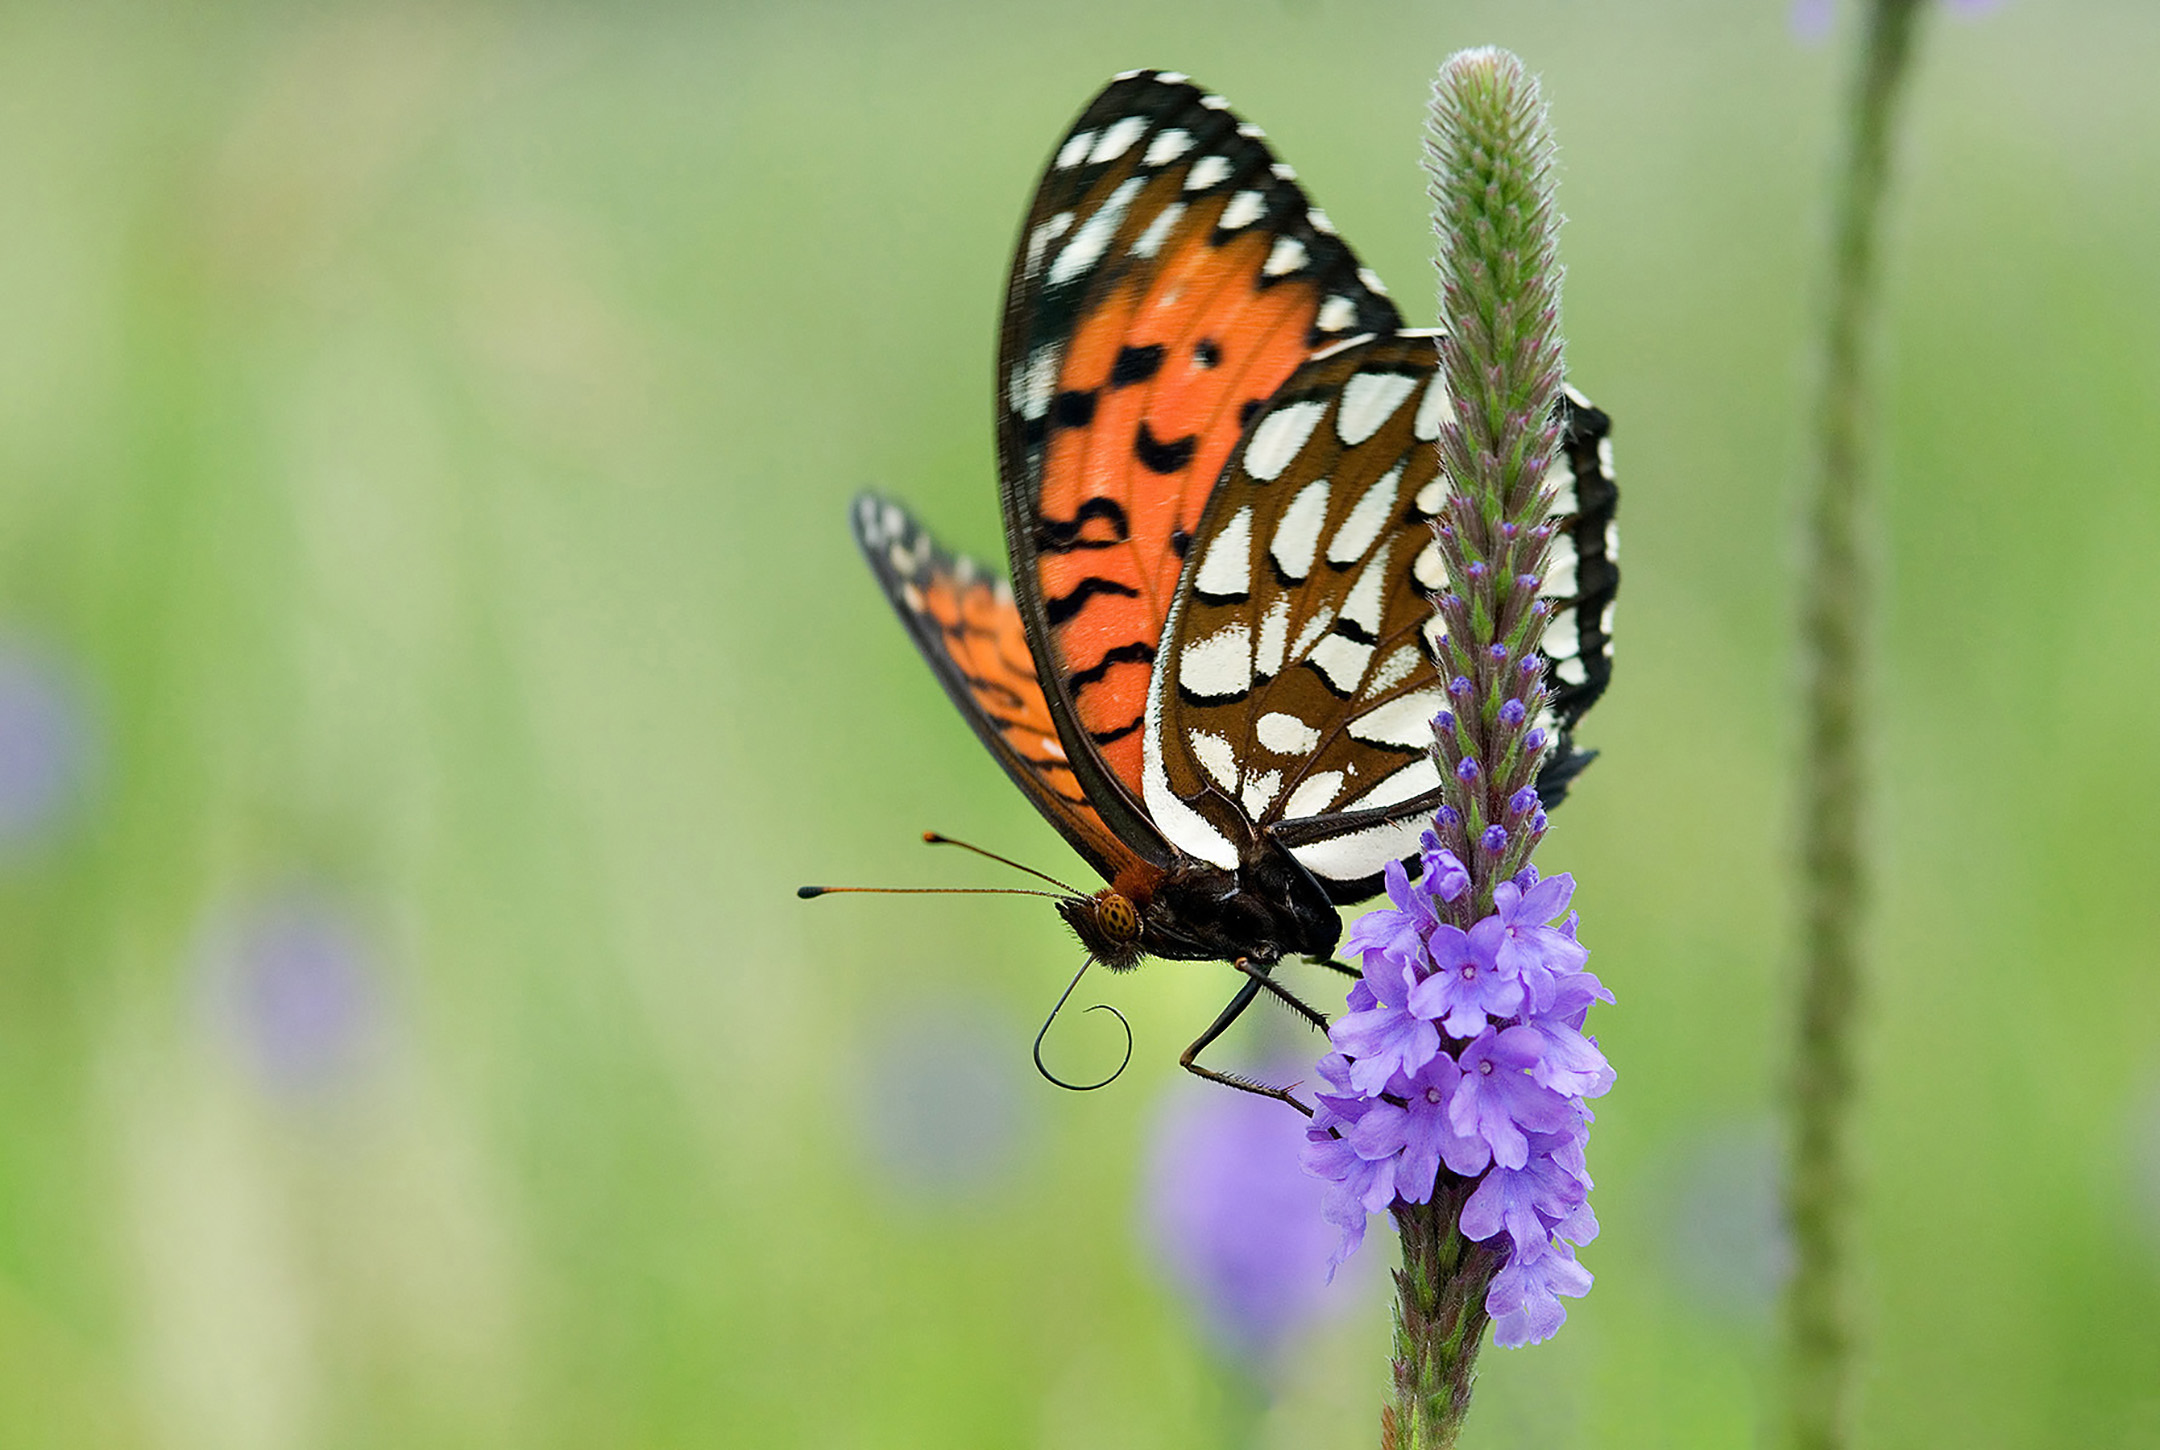 A butterfly rests with its wings slightly open on a tall purple flower. The forewings are orange, with black markings an a row of white spots along the margin. The hindwing is brown and covered in white blocks that are triangular or rectangular